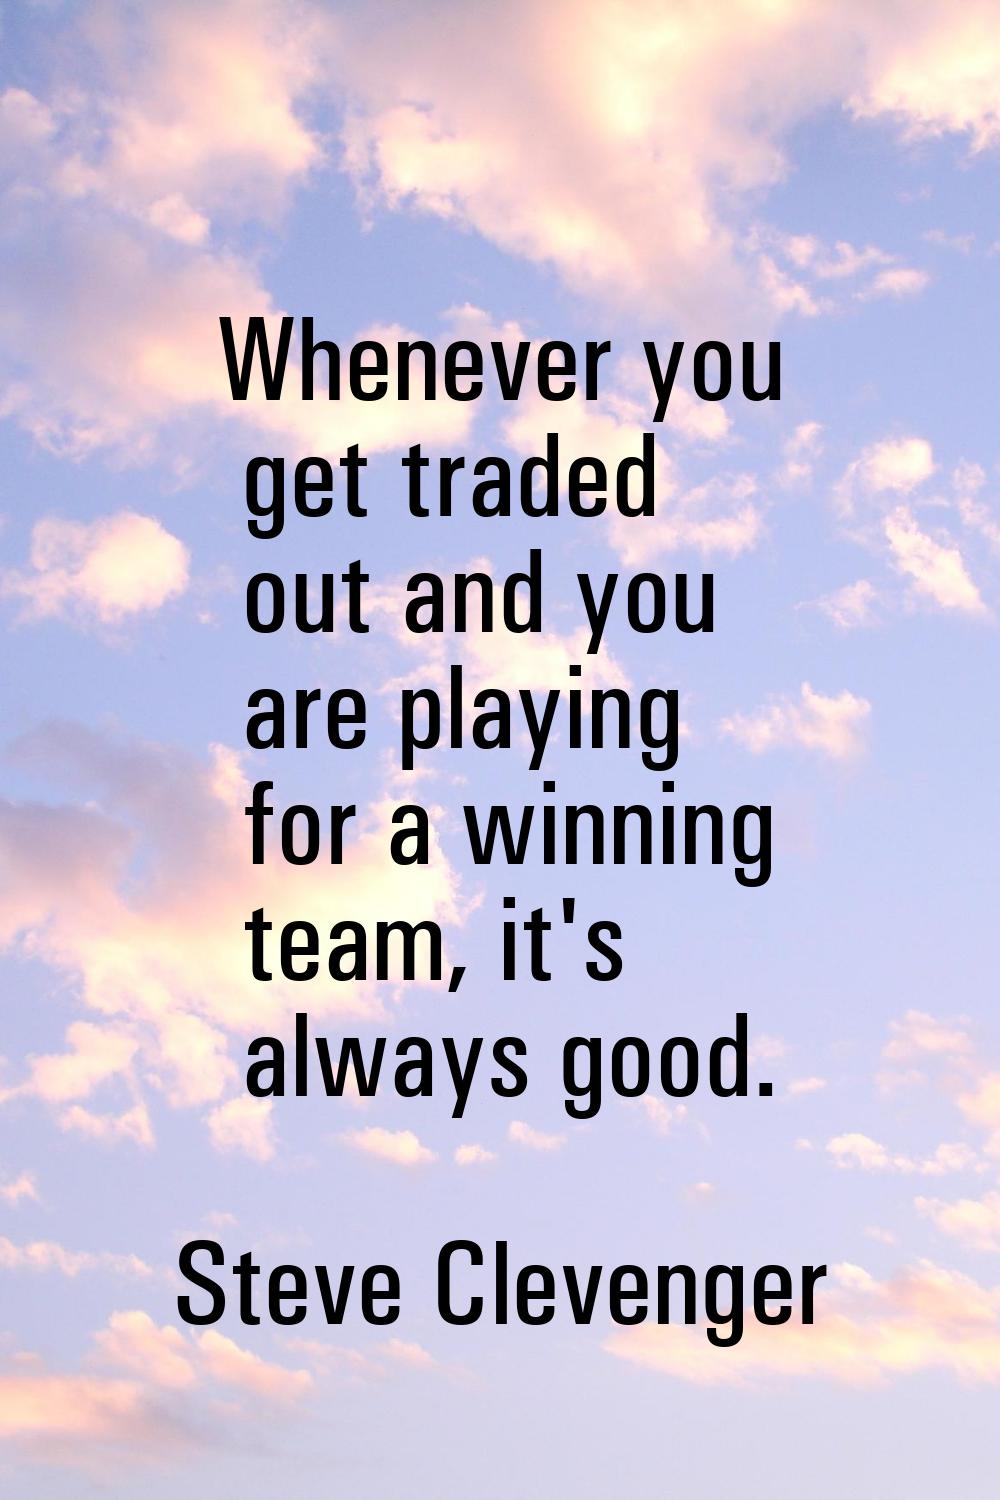 Whenever you get traded out and you are playing for a winning team, it's always good.